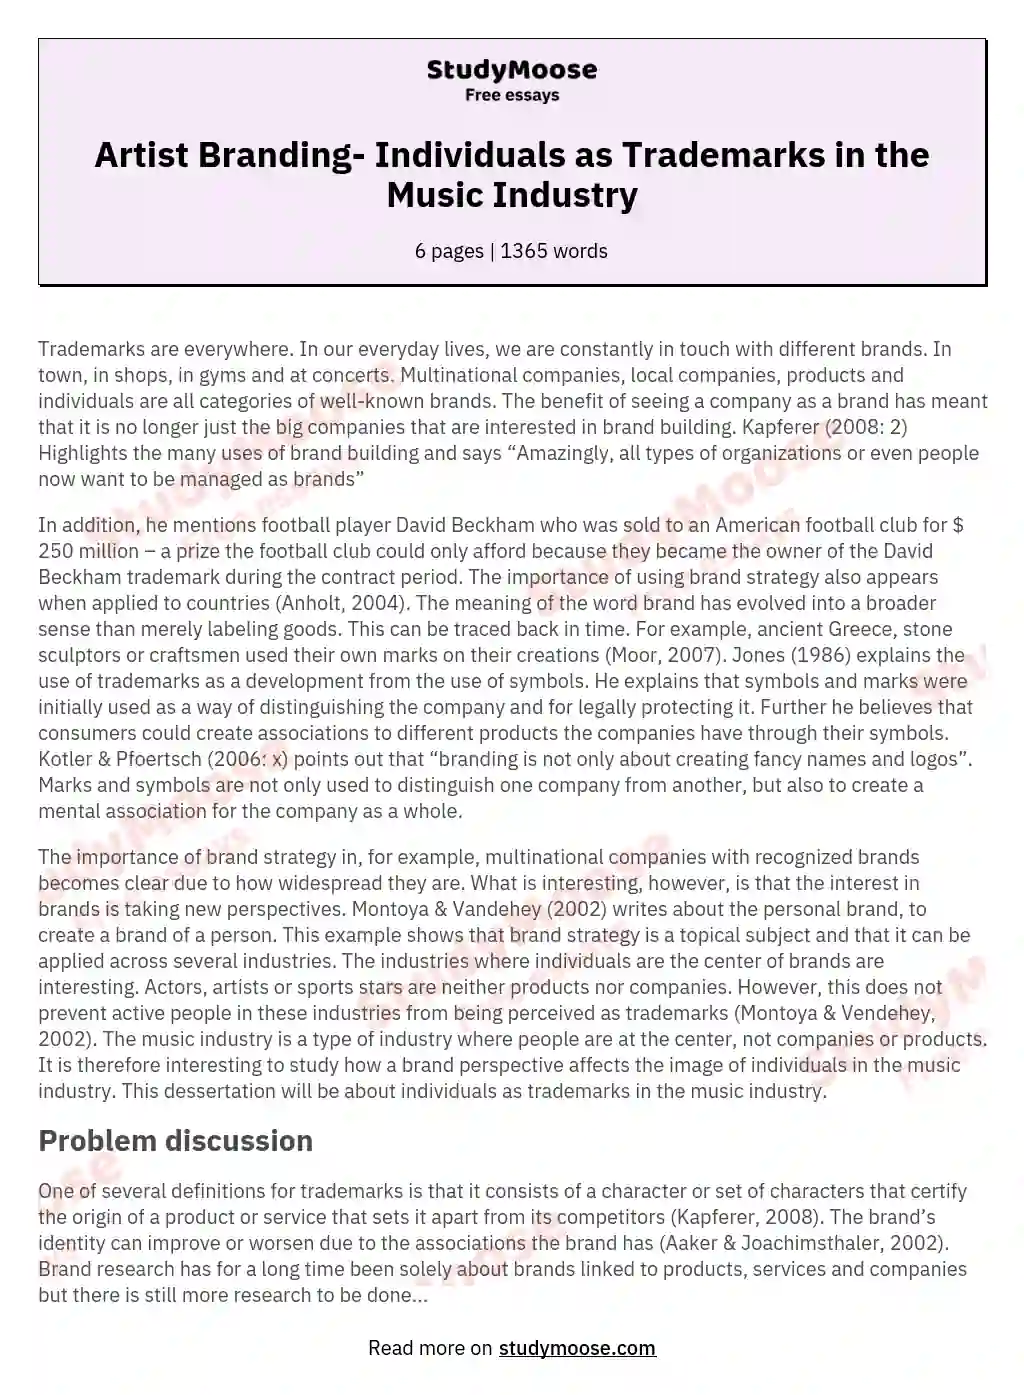 Artist Branding- Individuals as Trademarks in the Music Industry essay